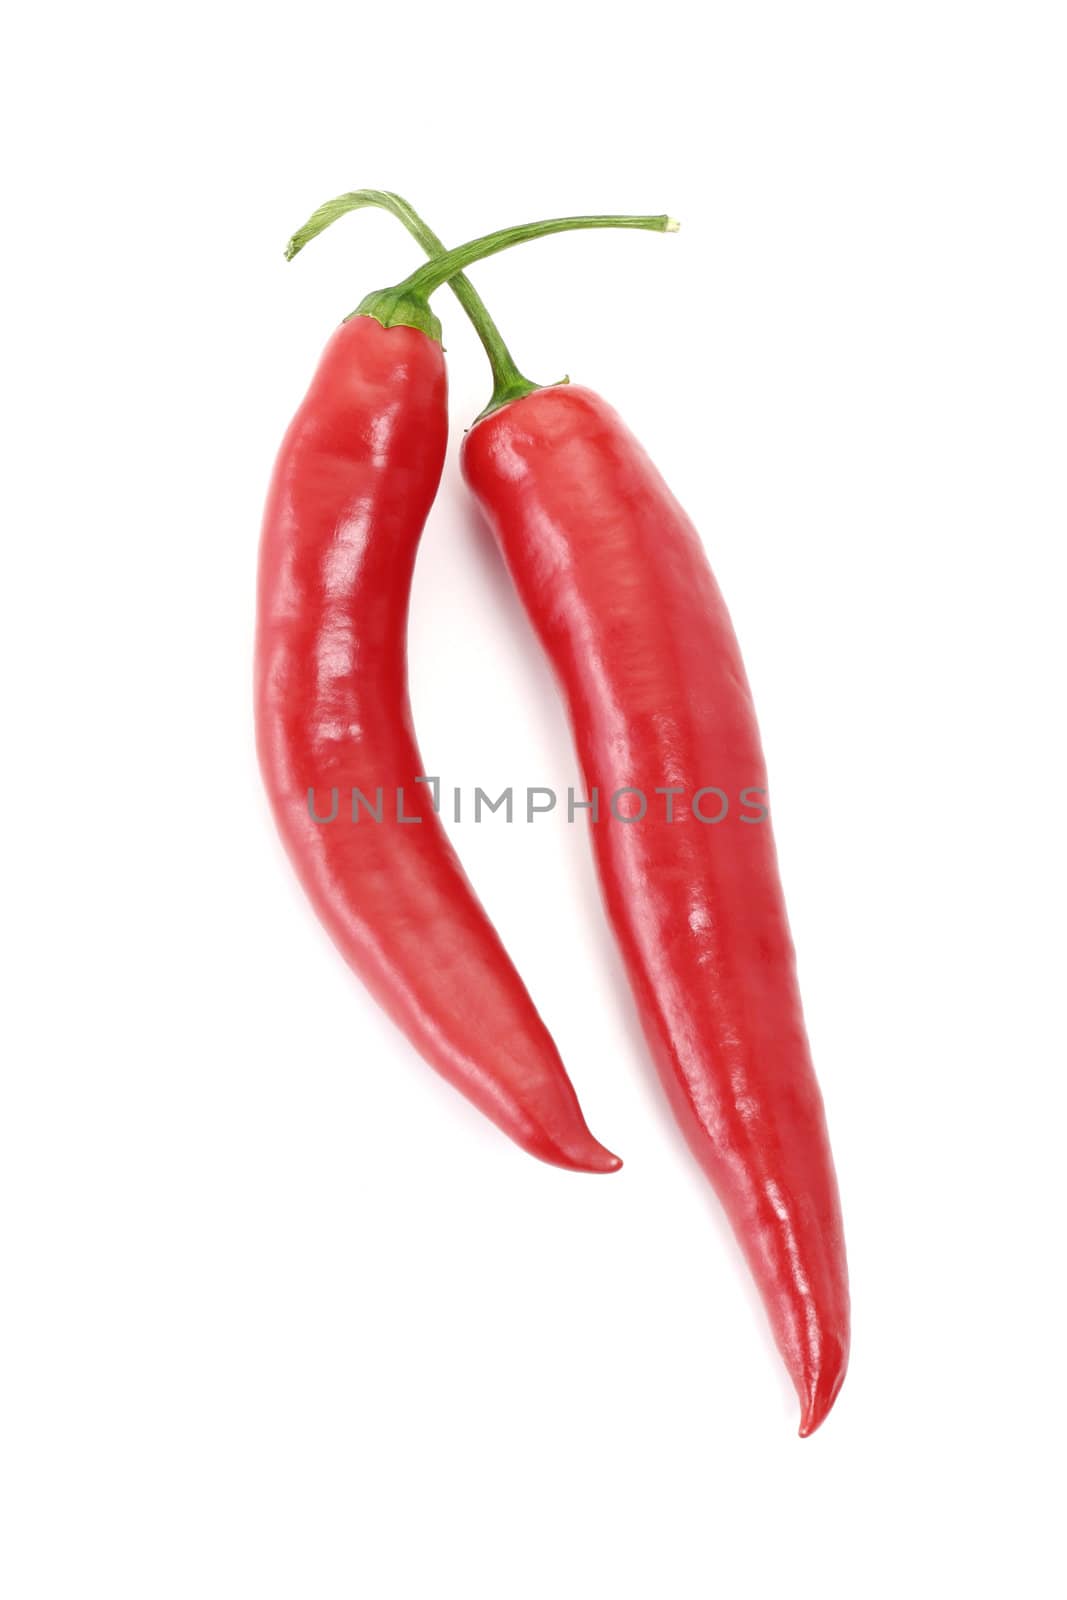 Red hot chili pepper on white